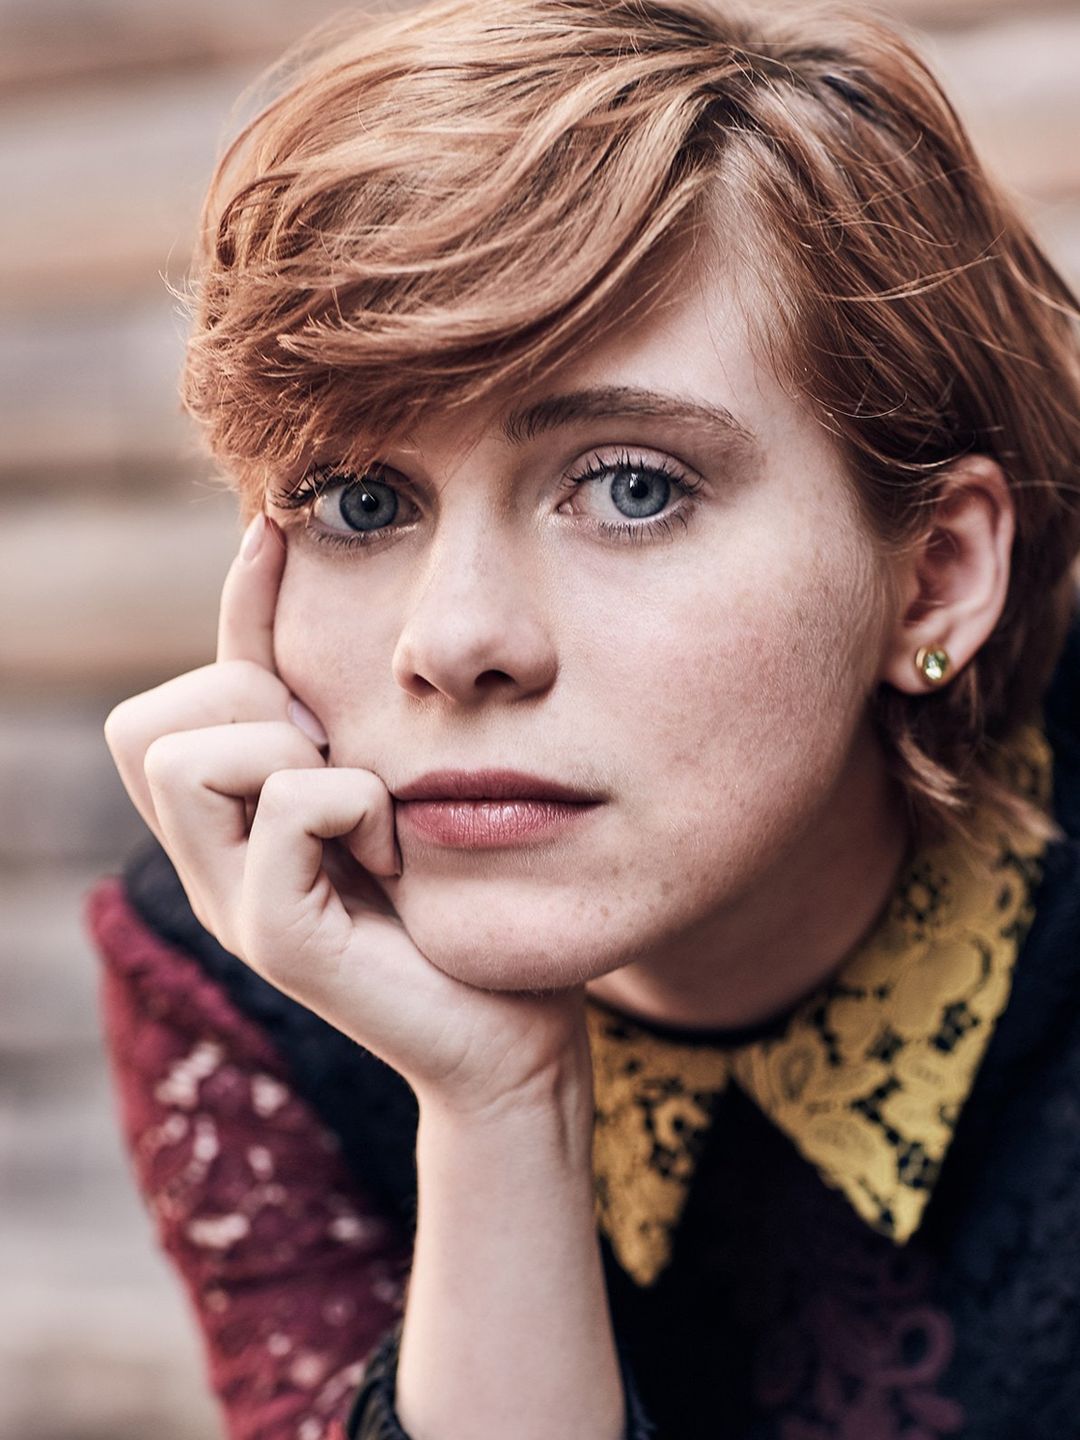 Sophia Lillis who is her father